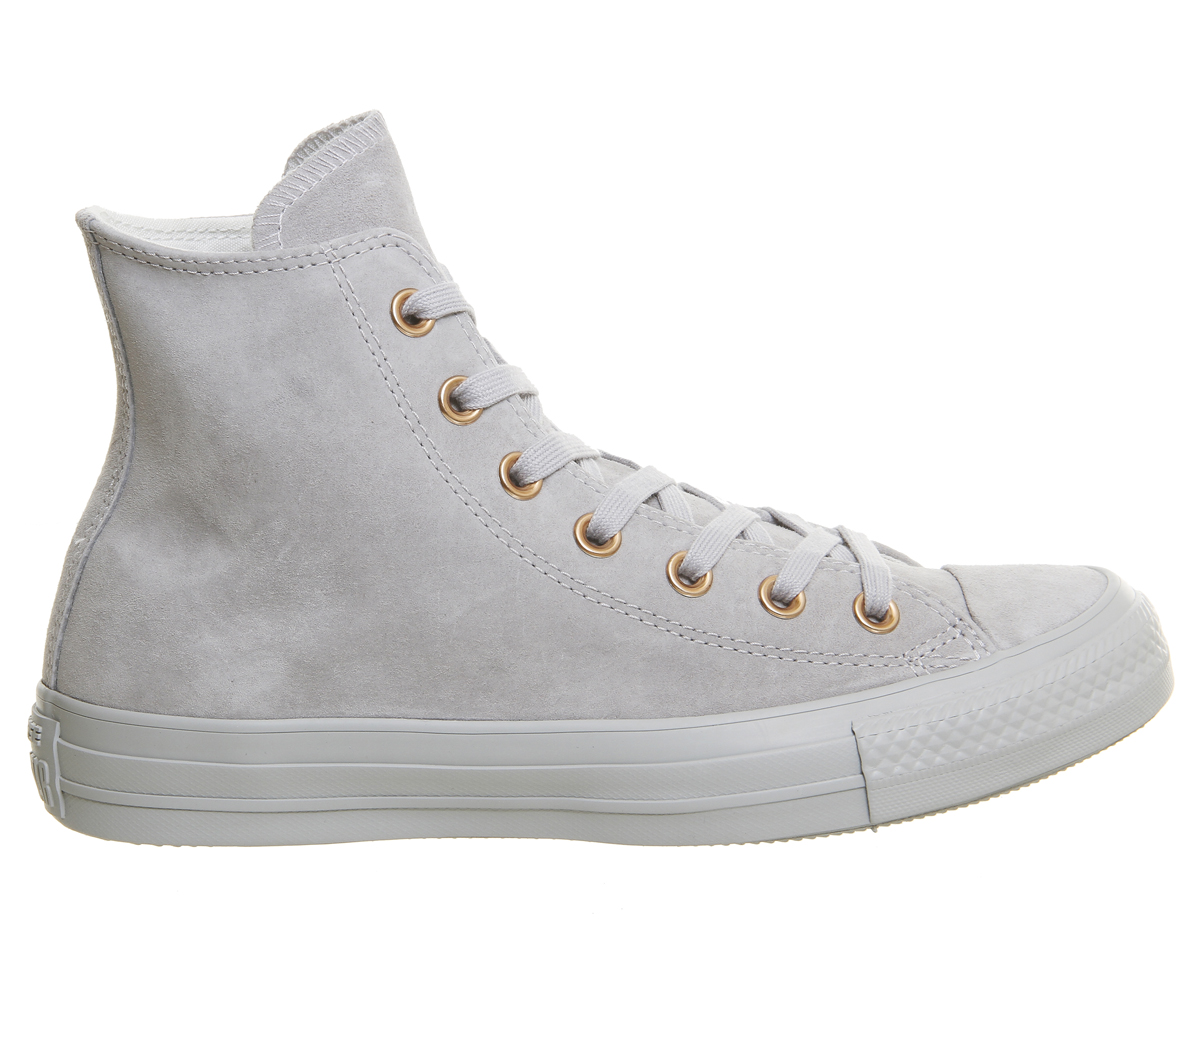 grey suede converse high tops with rose gold